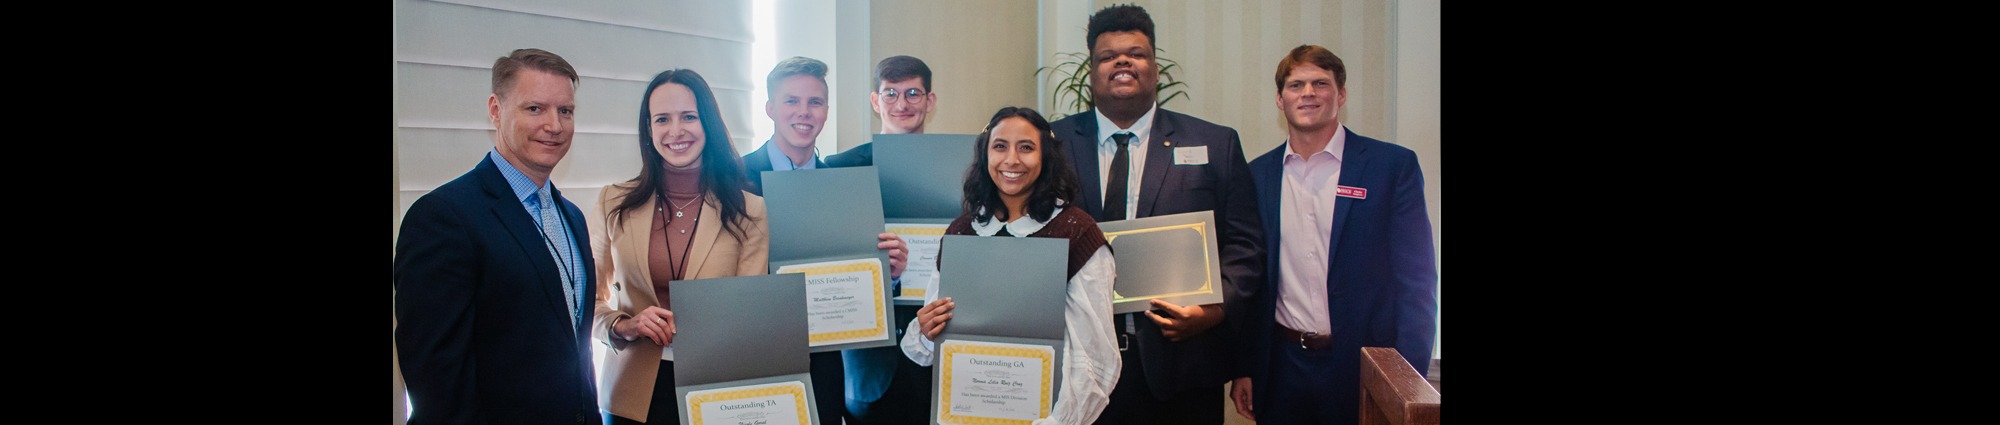 Students pose for a photo with their awards during the CMISS retreat